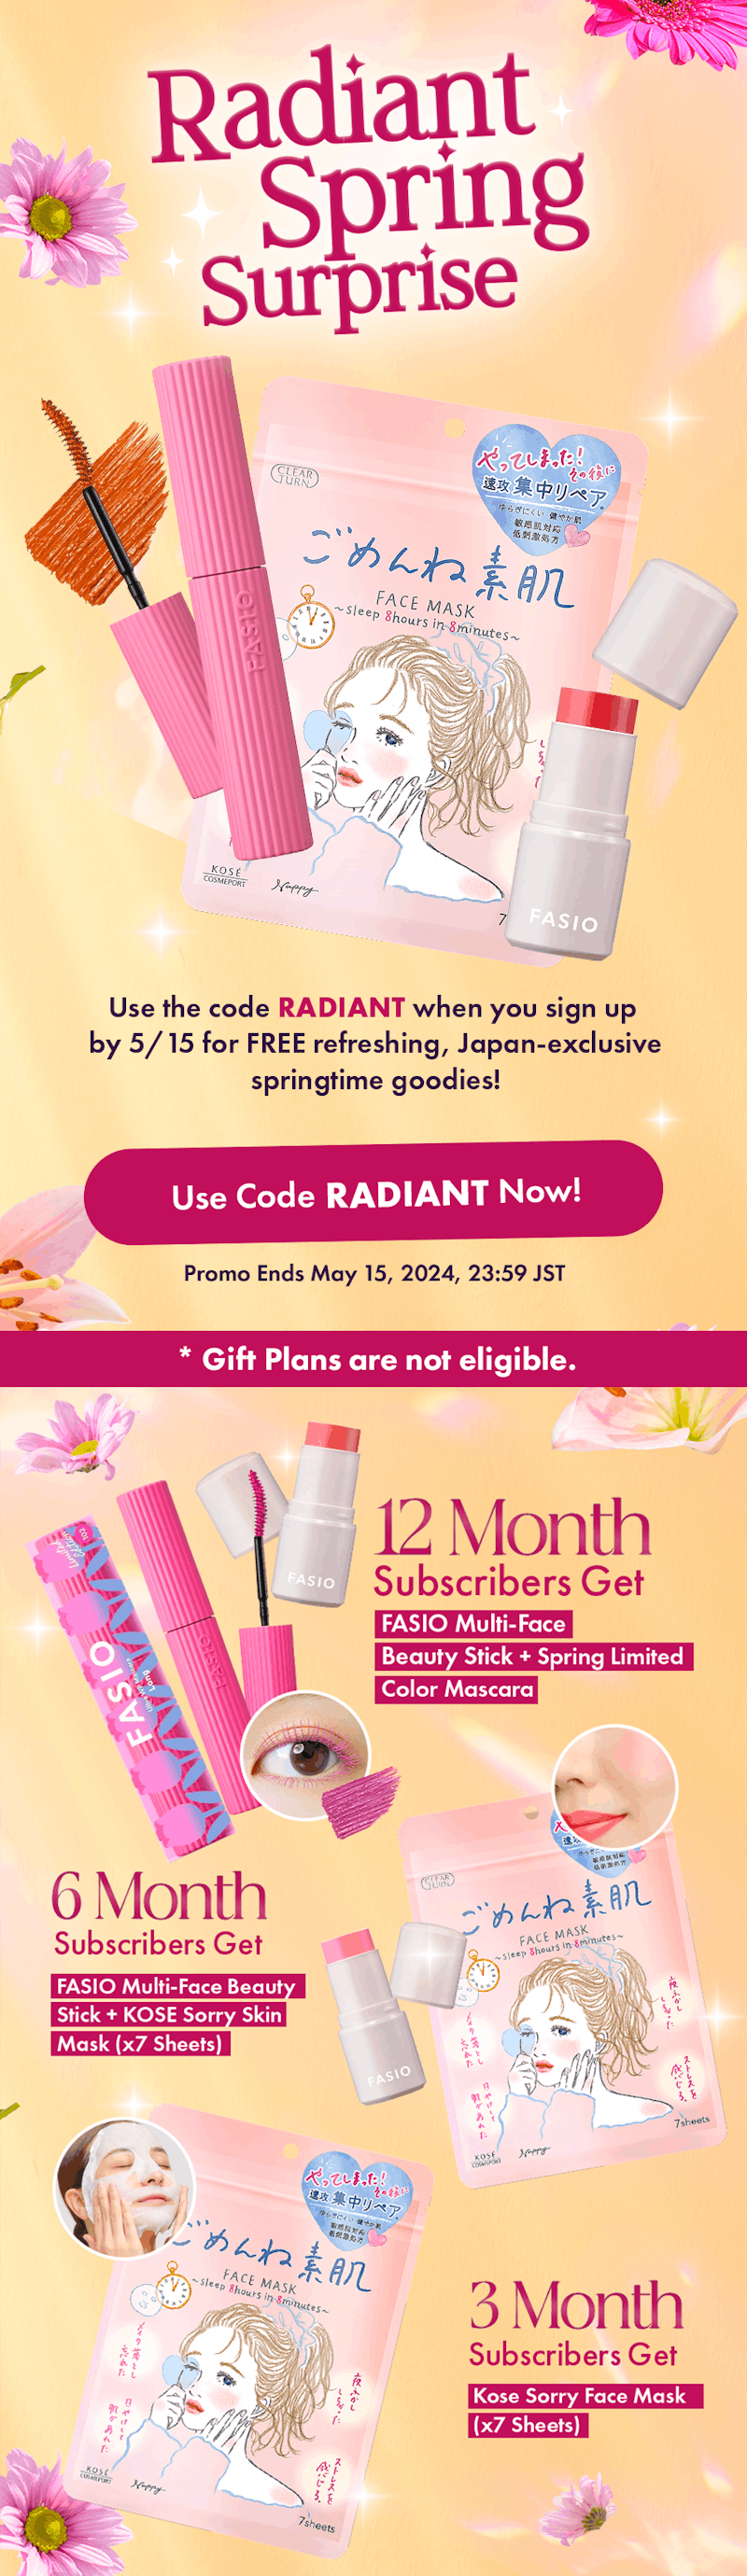 Sign up for nomakenolife using the code RADIANT to get these beauty-enhancing items in your box by 5/15